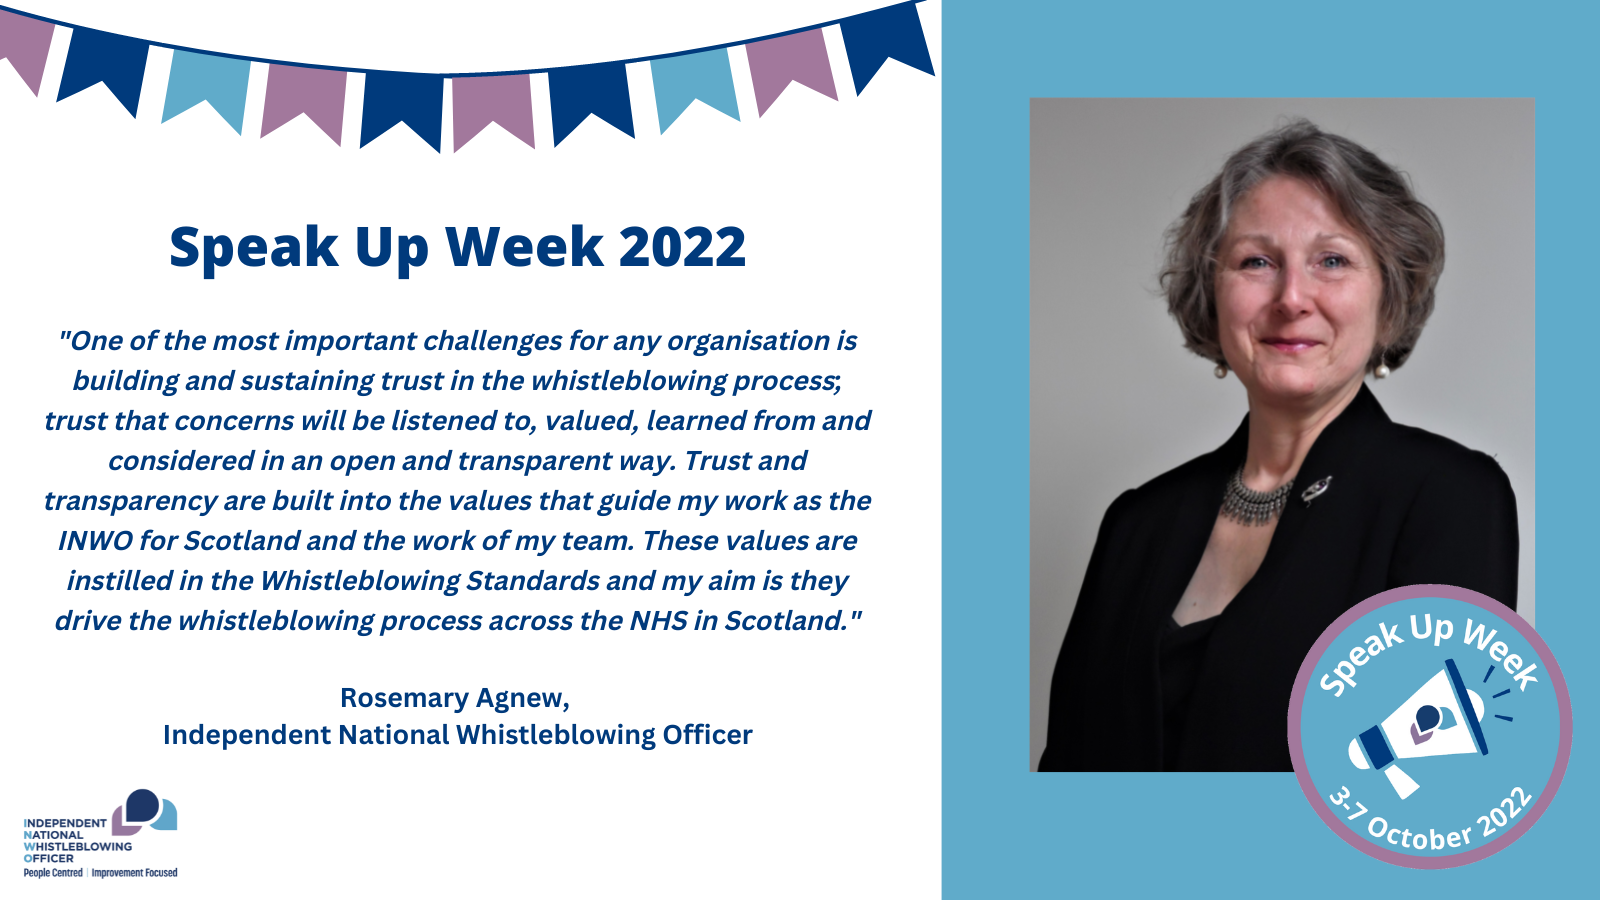 A quote from the INWO, Rosemary Agnew: "One of the most important challenges for any organisation is building and sustaining trust in the whistleblowing process; trust that concerns will be listened to, valued, learned from and considered in an open and transparent way. Trust and transparency are built into the values that guide my work as the INWO for Scotland and the work of my team. These values are instilled in the Whistleblowing Standards and my aim is they drive the whistleblowing process across the NHS in Scotland."